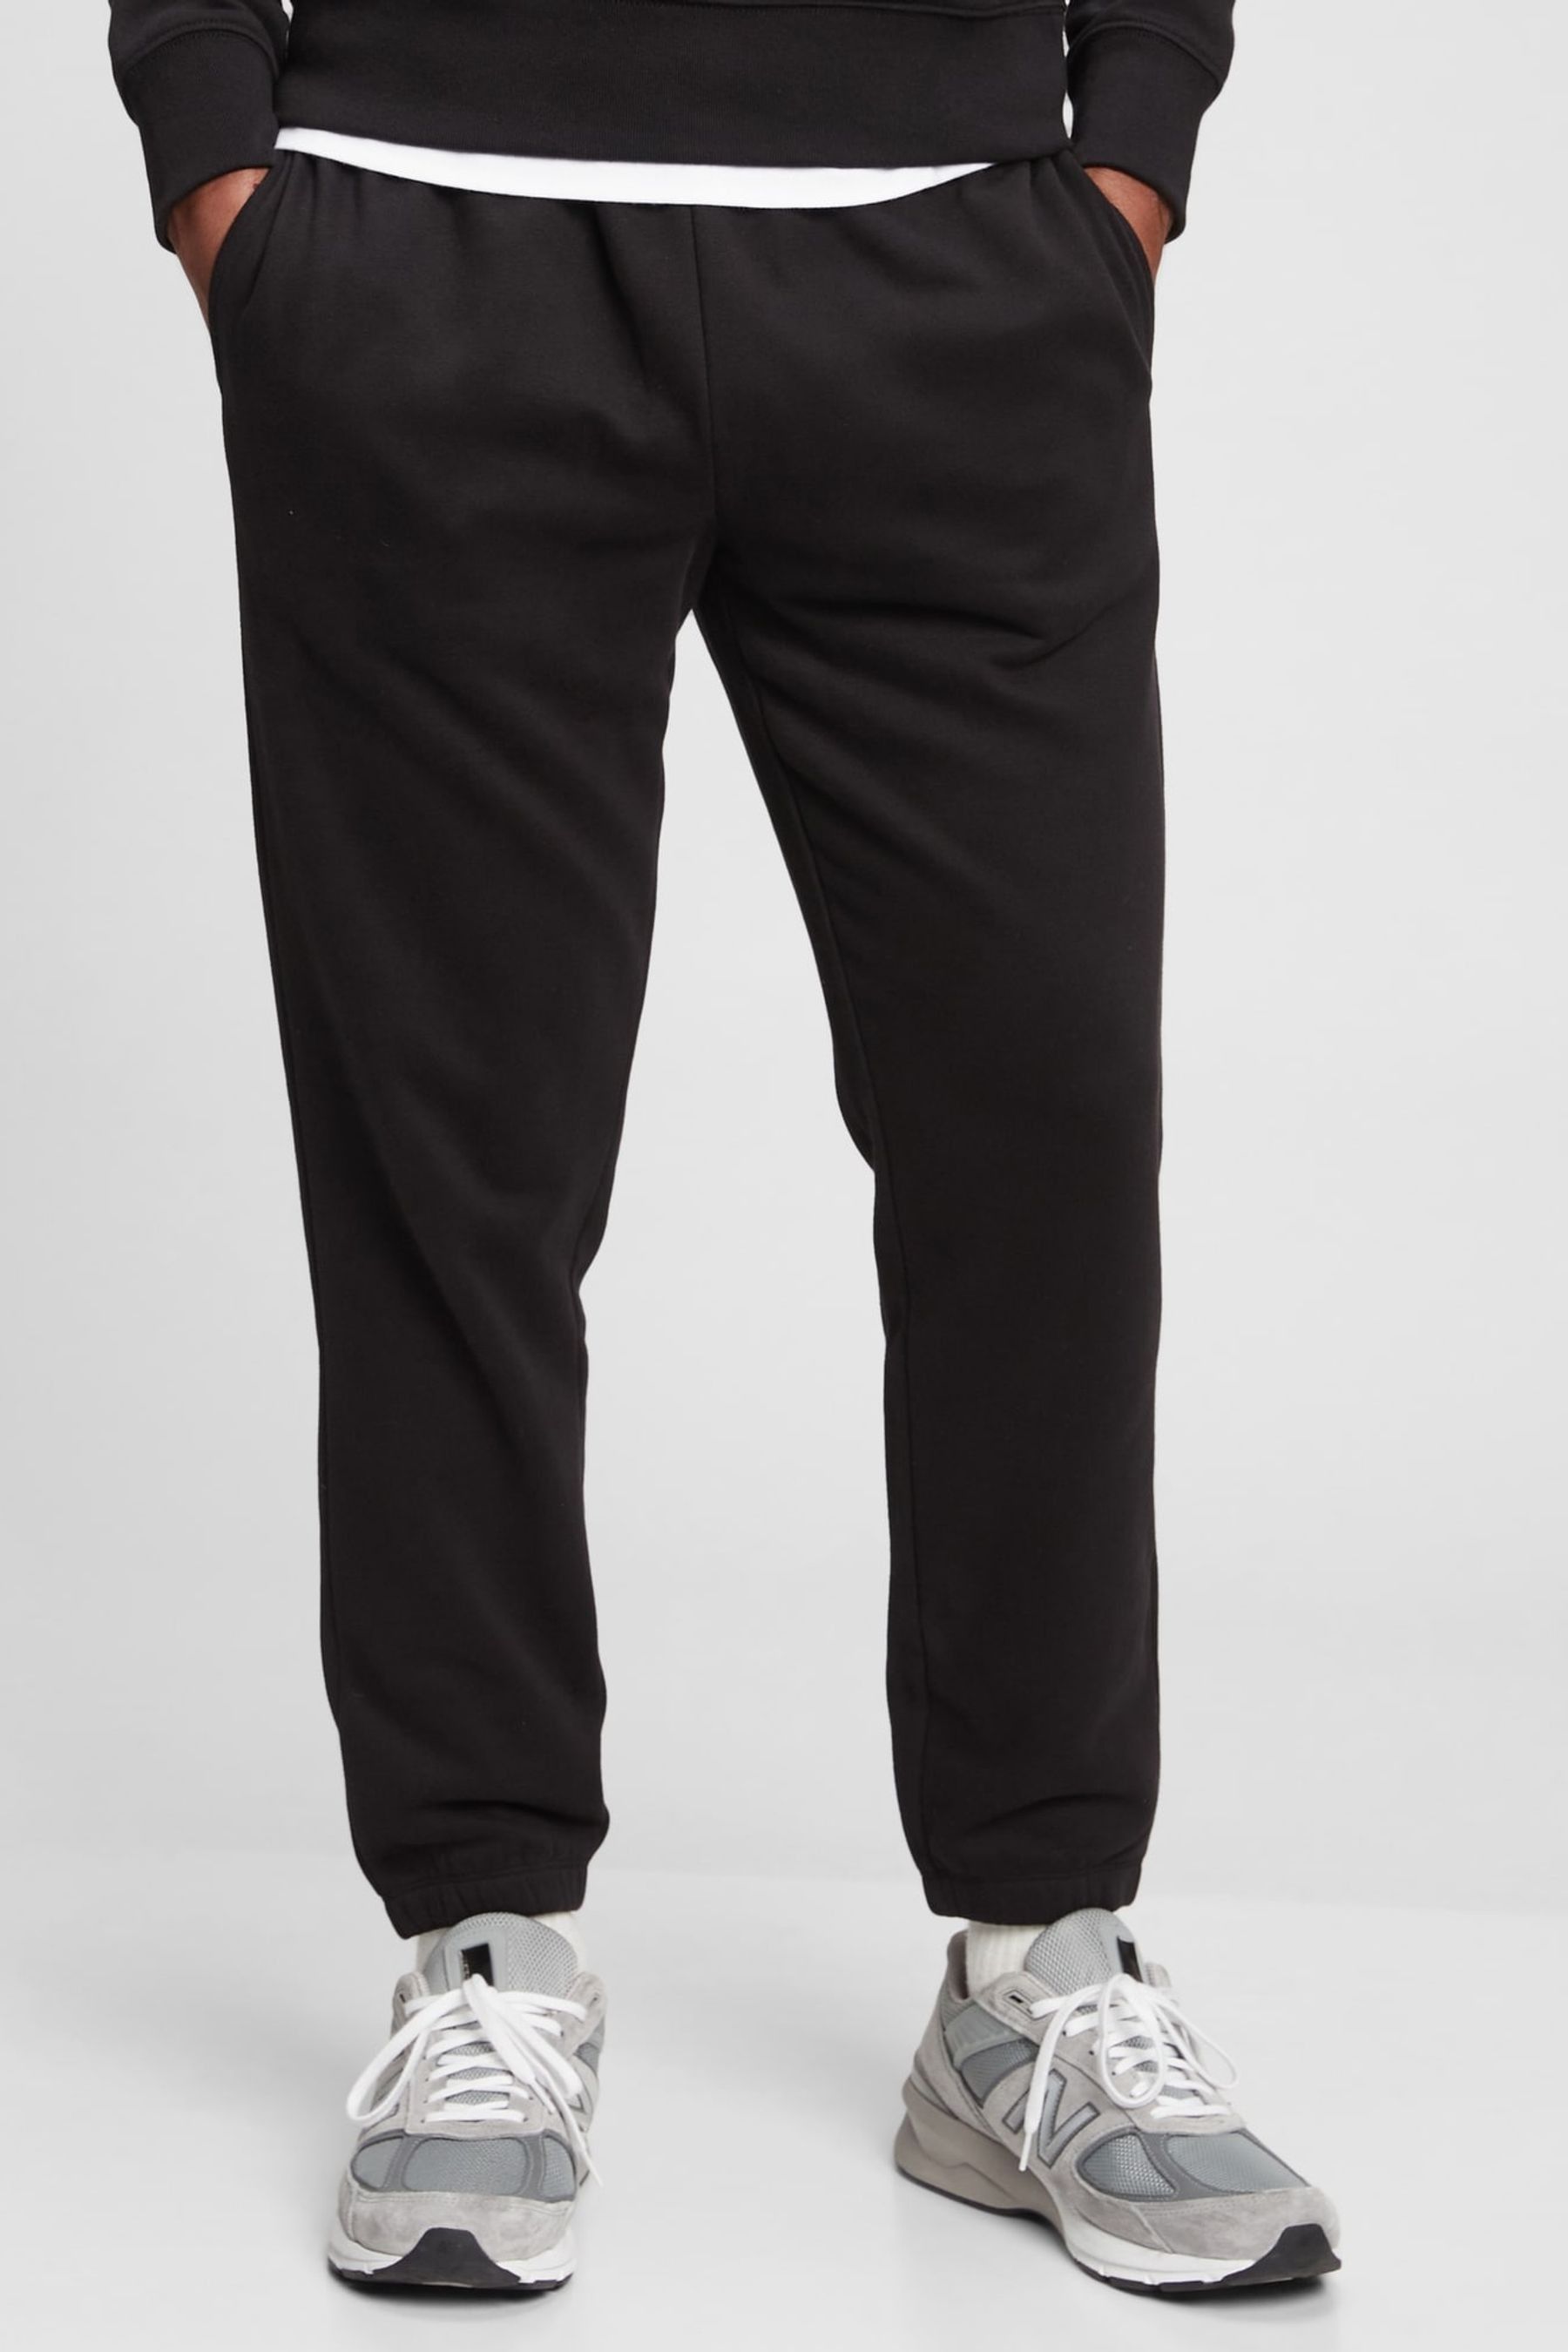 Buy Black Vintage Pull-On Soft Joggers from the Gap online shop